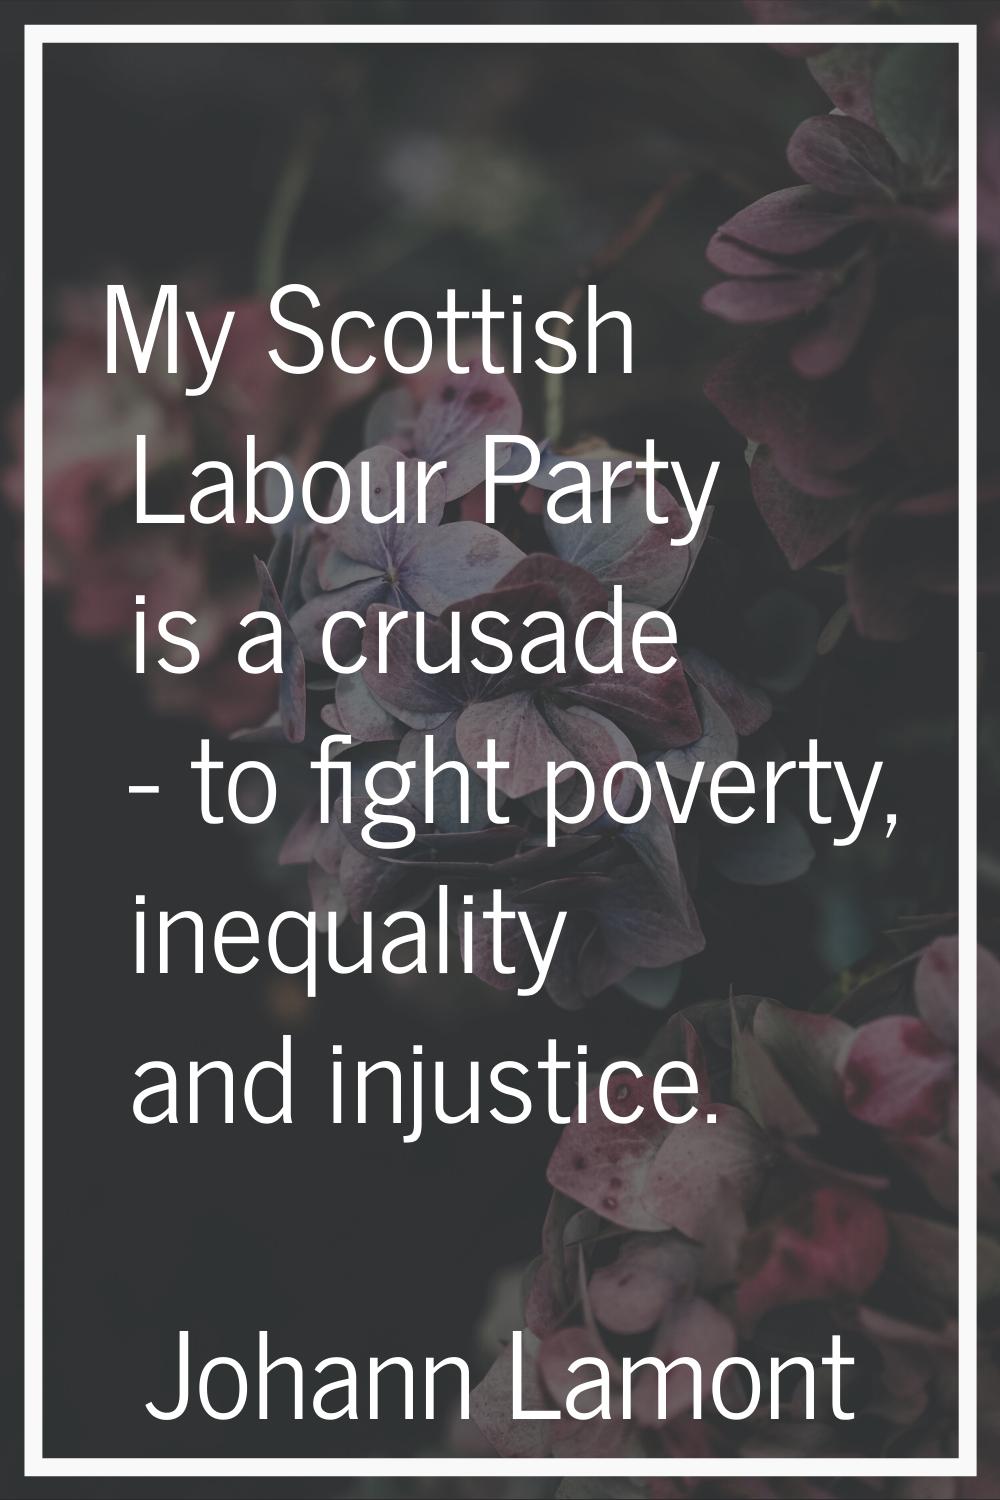 My Scottish Labour Party is a crusade - to fight poverty, inequality and injustice.